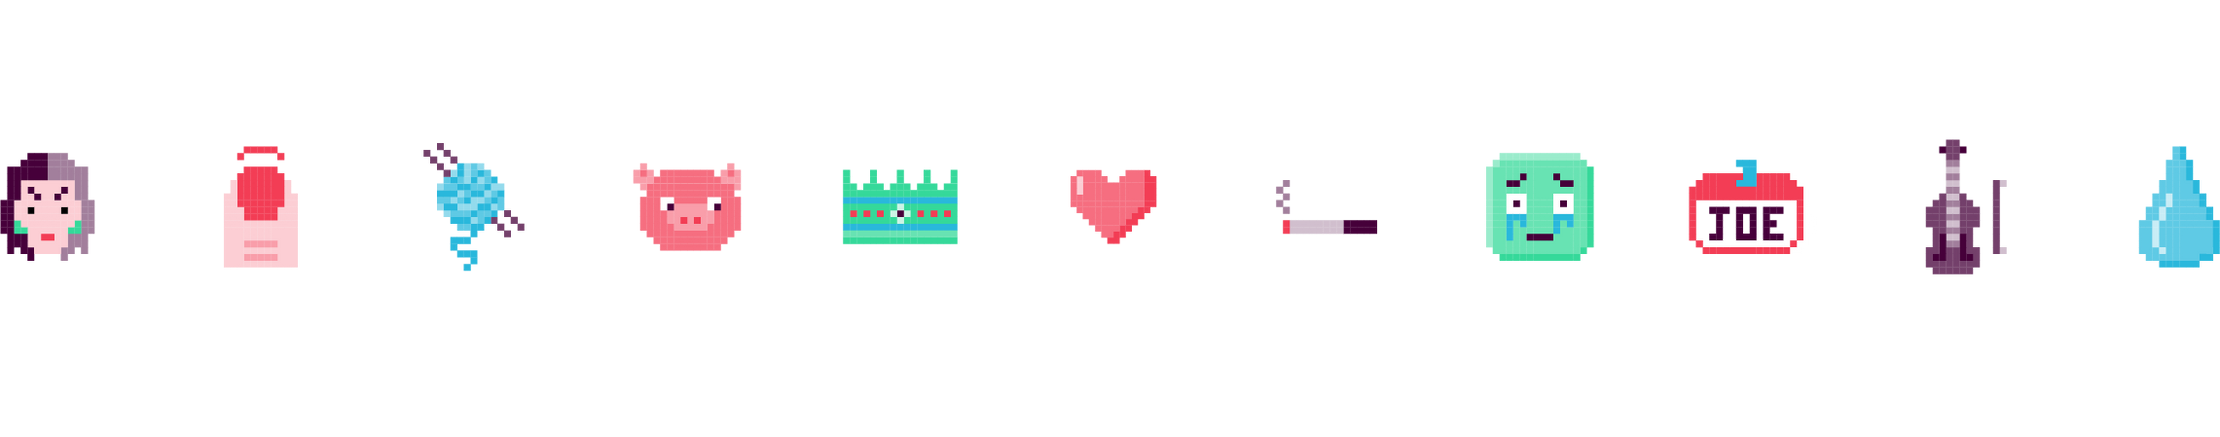 A selection of graphics based on work enemies in the style of arcade pixel art graphics. They include a fingernail, cigarrettes, a crown and a pig.